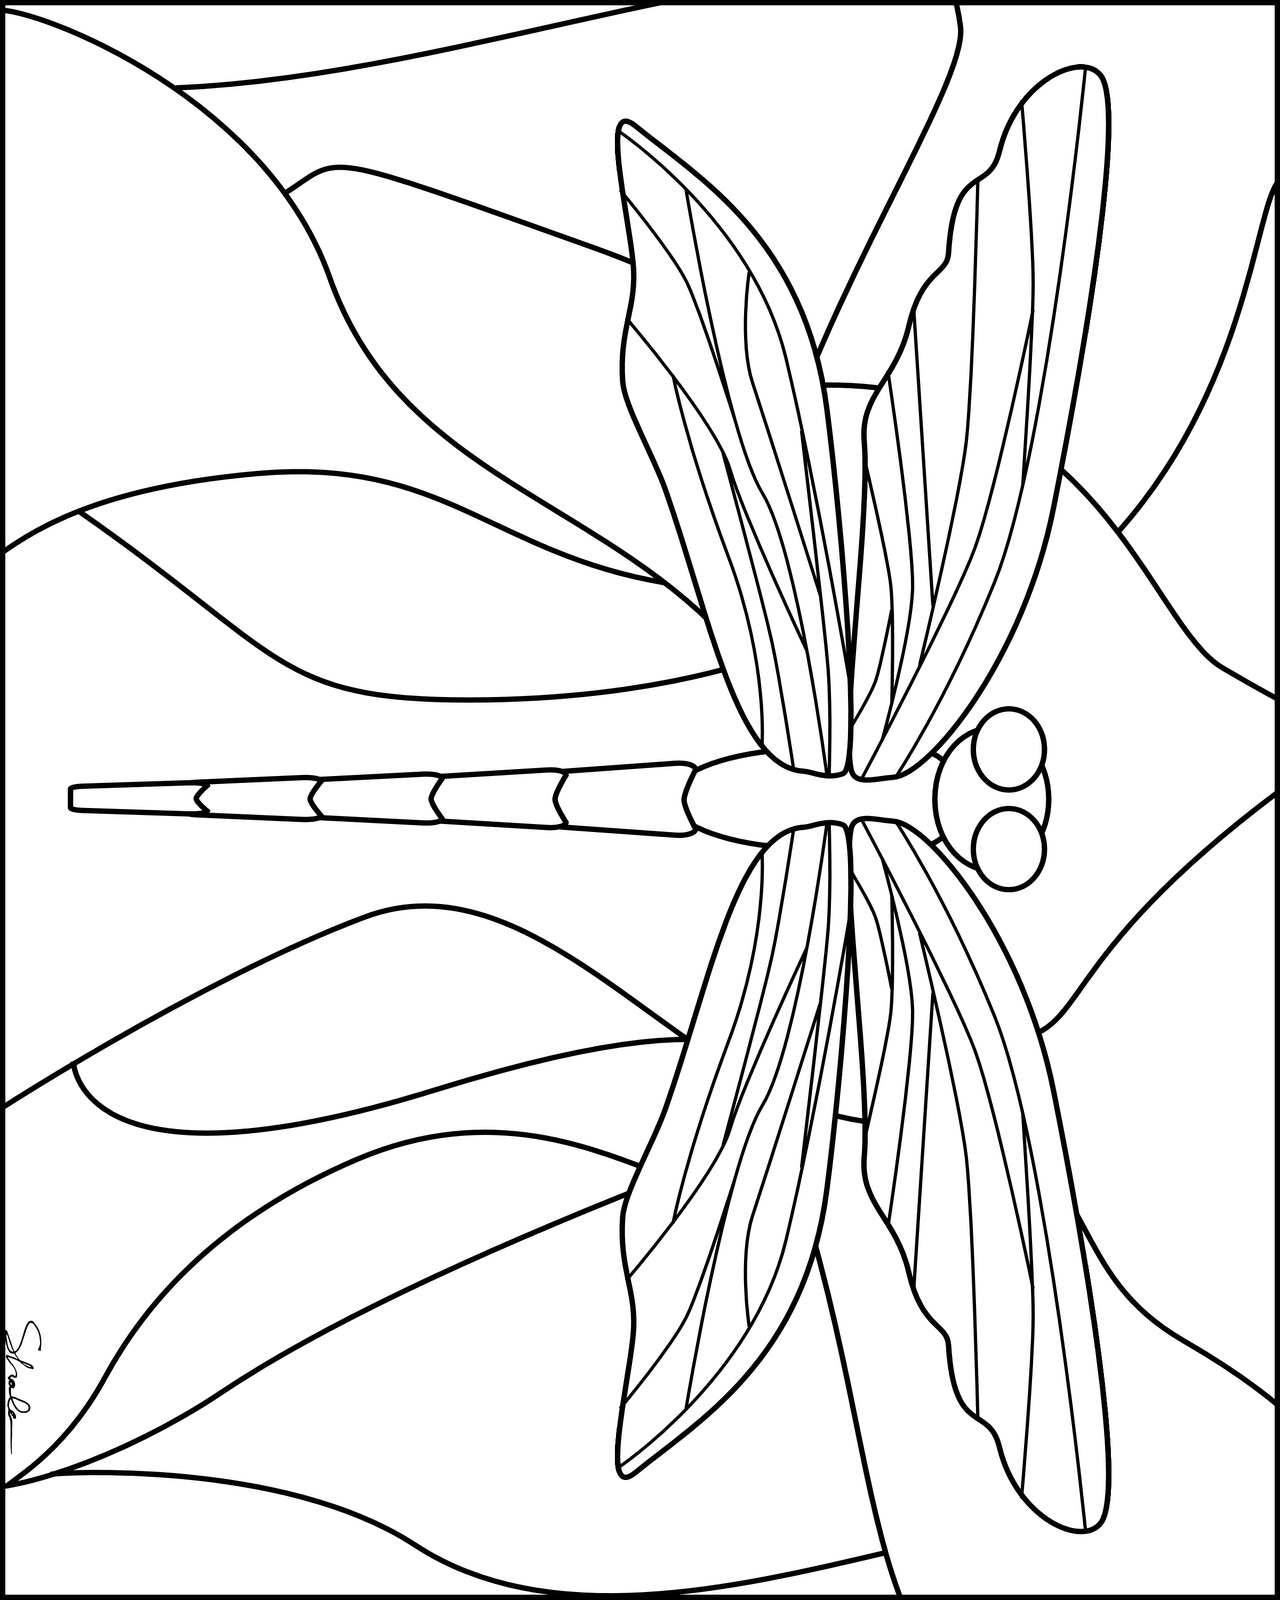 Free Printable Dragonfly Coloring Pages For Kids | Animal ...